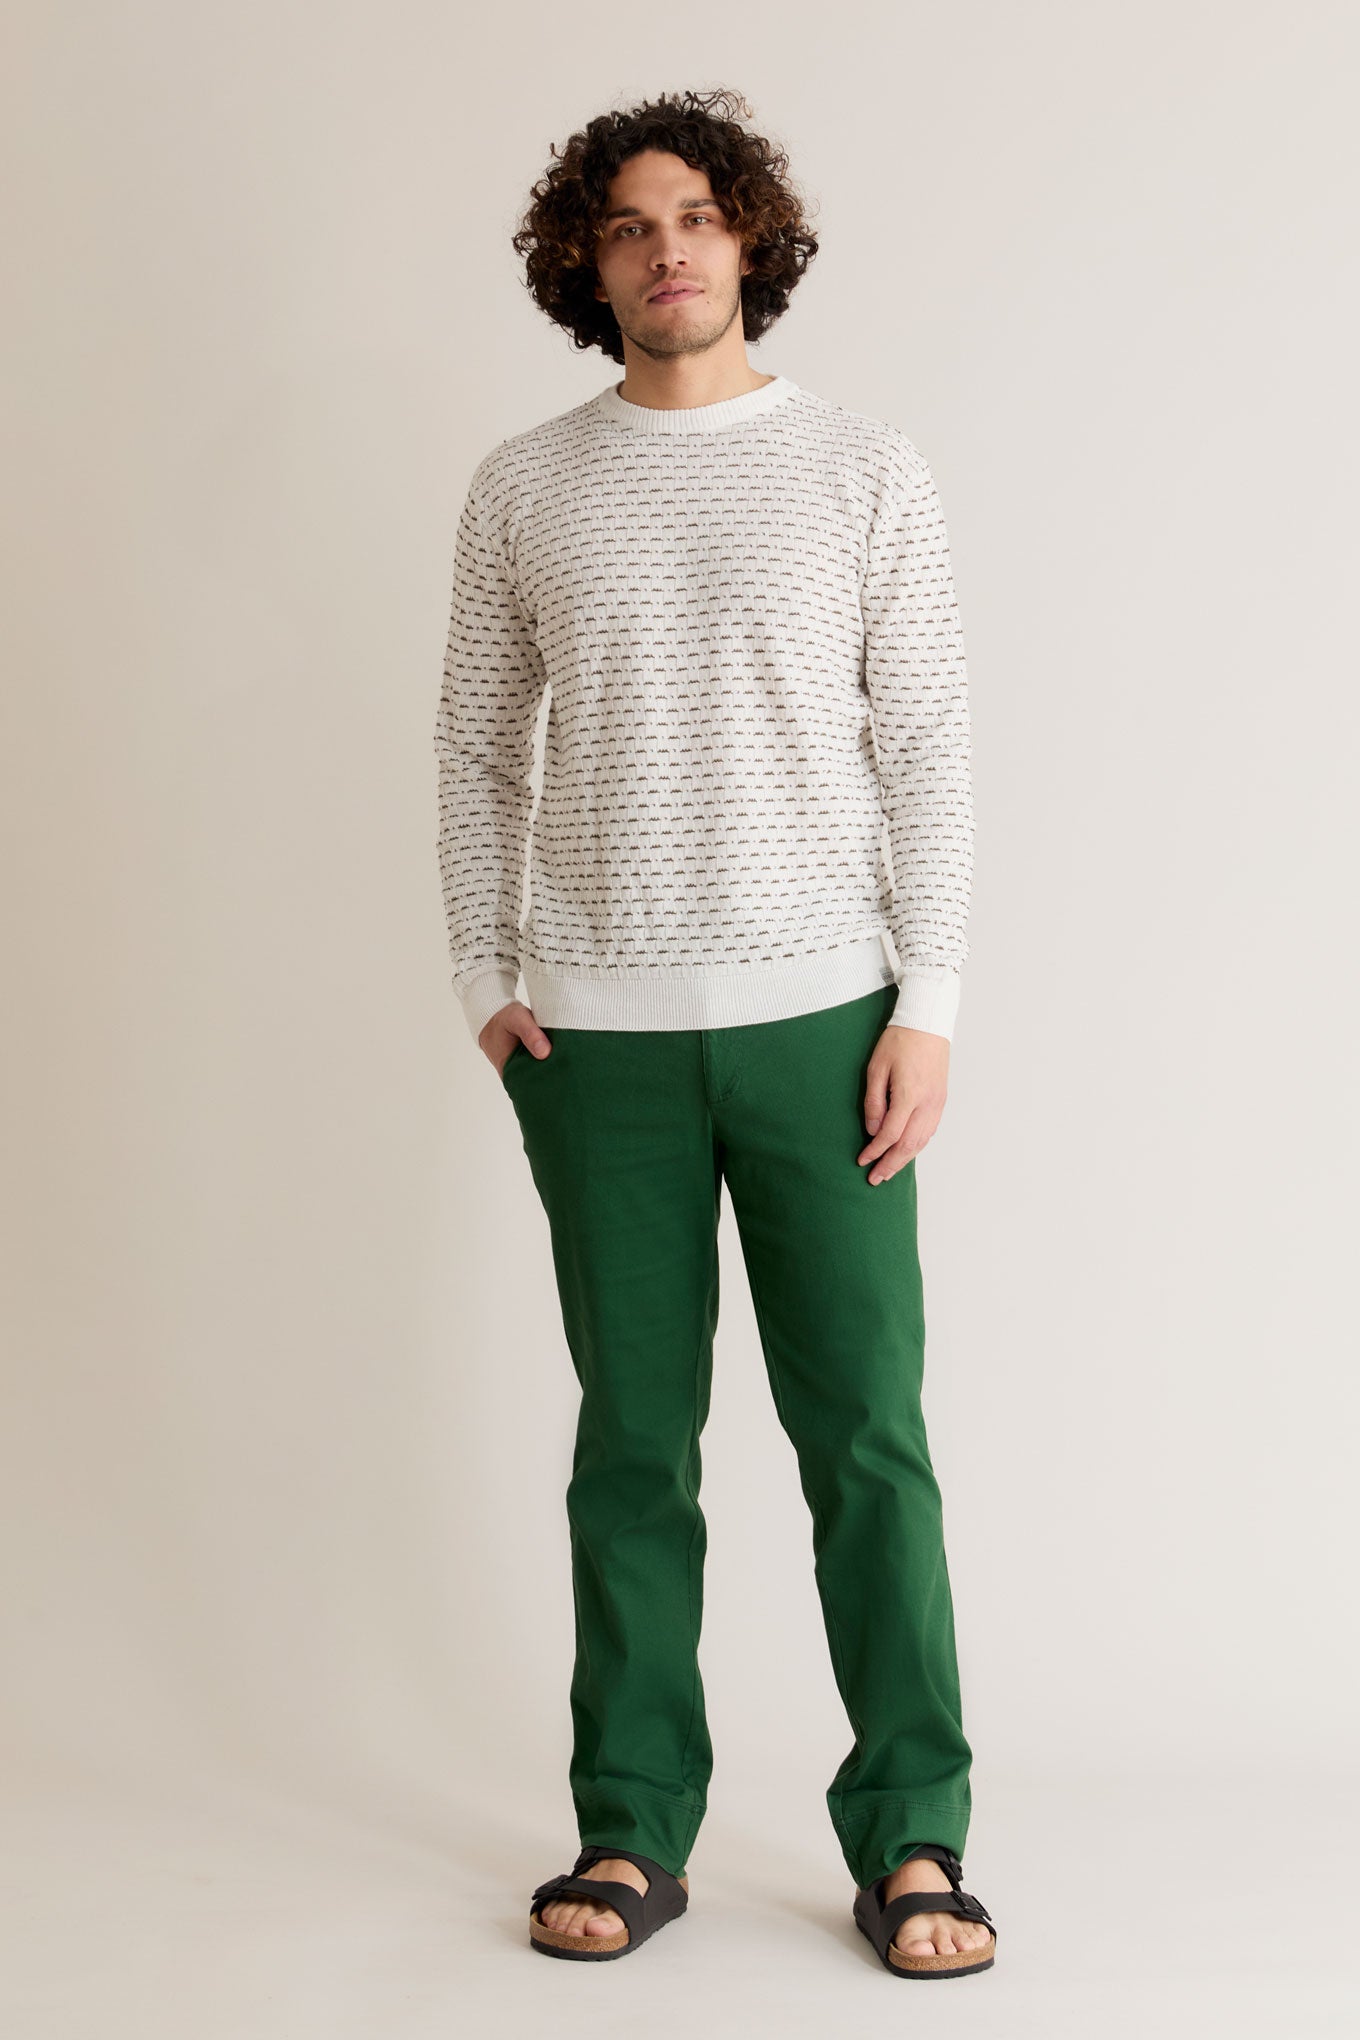 SOL - Organic Cotton Trouser Forest Green